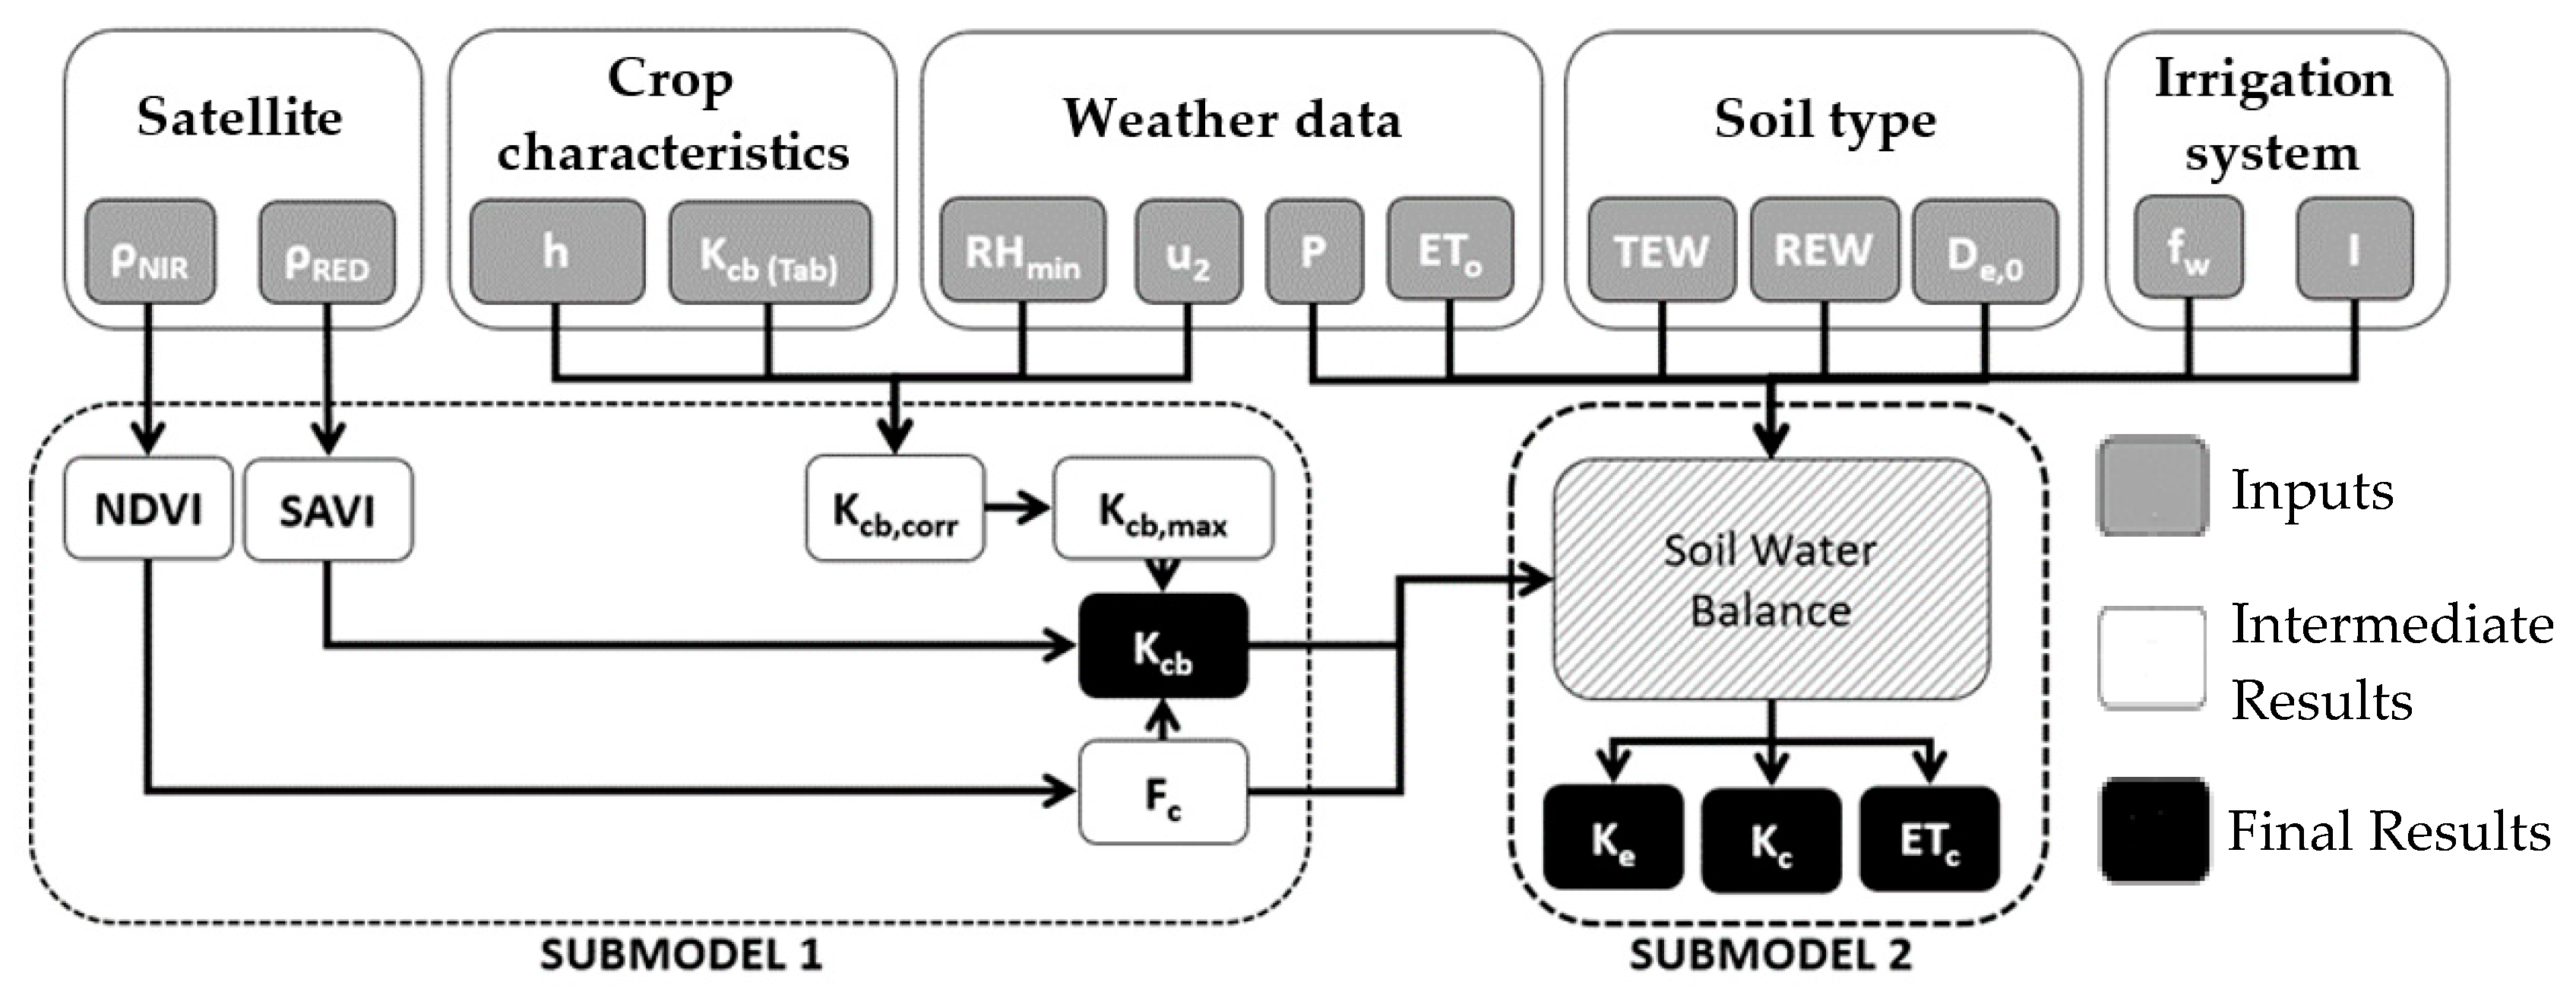 Water Free Full Text A Novel Arcgis Toolbox For Estimating Crop Water Demands By Integrating The Dual Crop Coefficient Approach With Multi Satellite Imagery Html